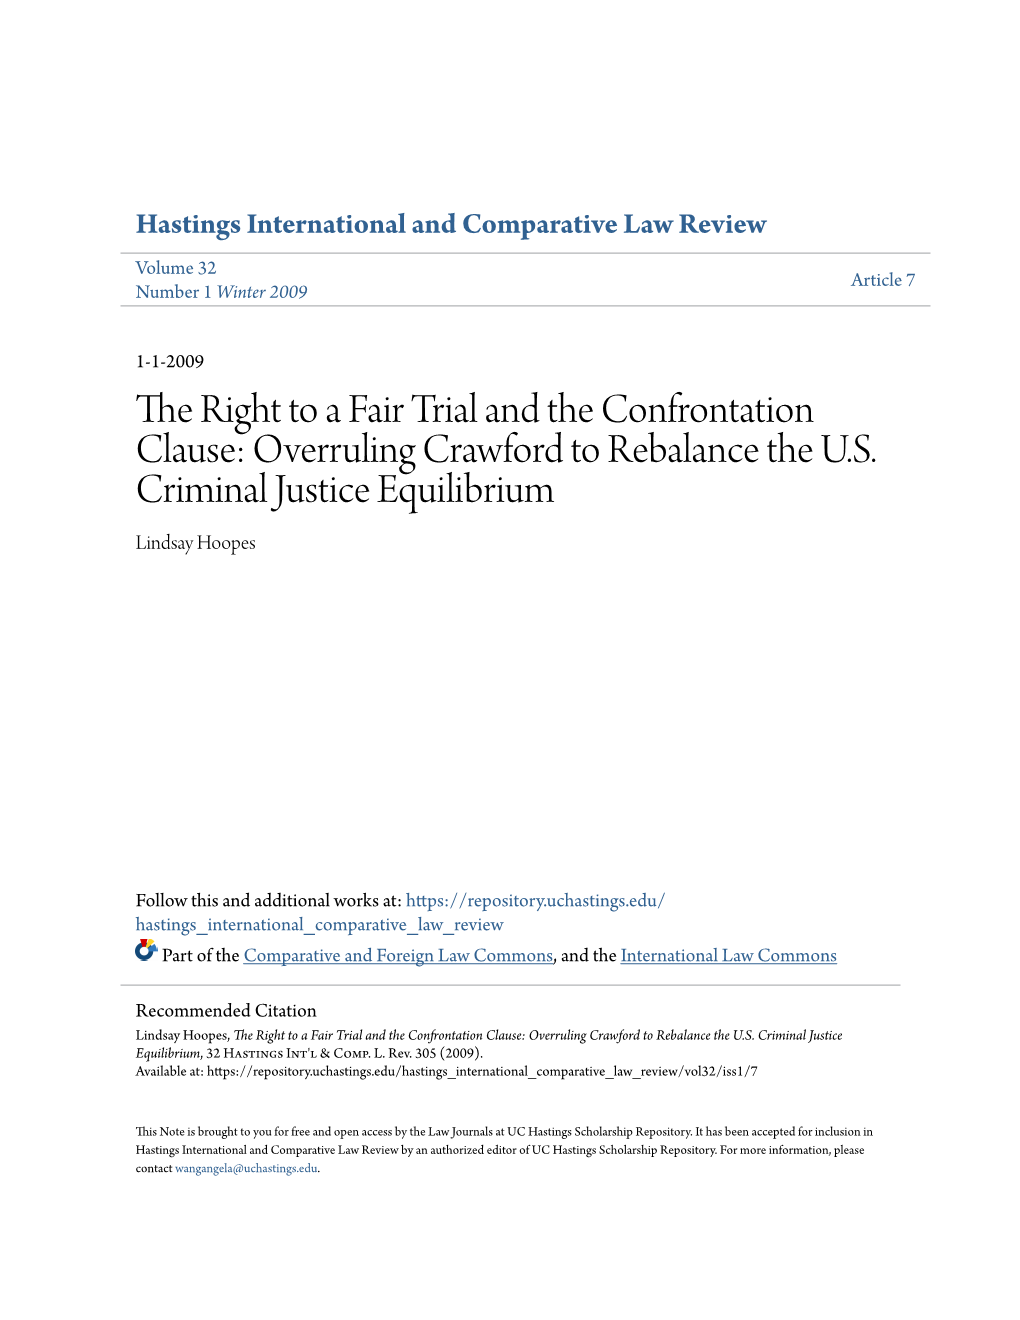 The Right to a Fair Trial and the Confrontation Clause: Overruling Crawford to Rebalance the U.S. Criminal Justice Equilibrium Lindsay Hoopes